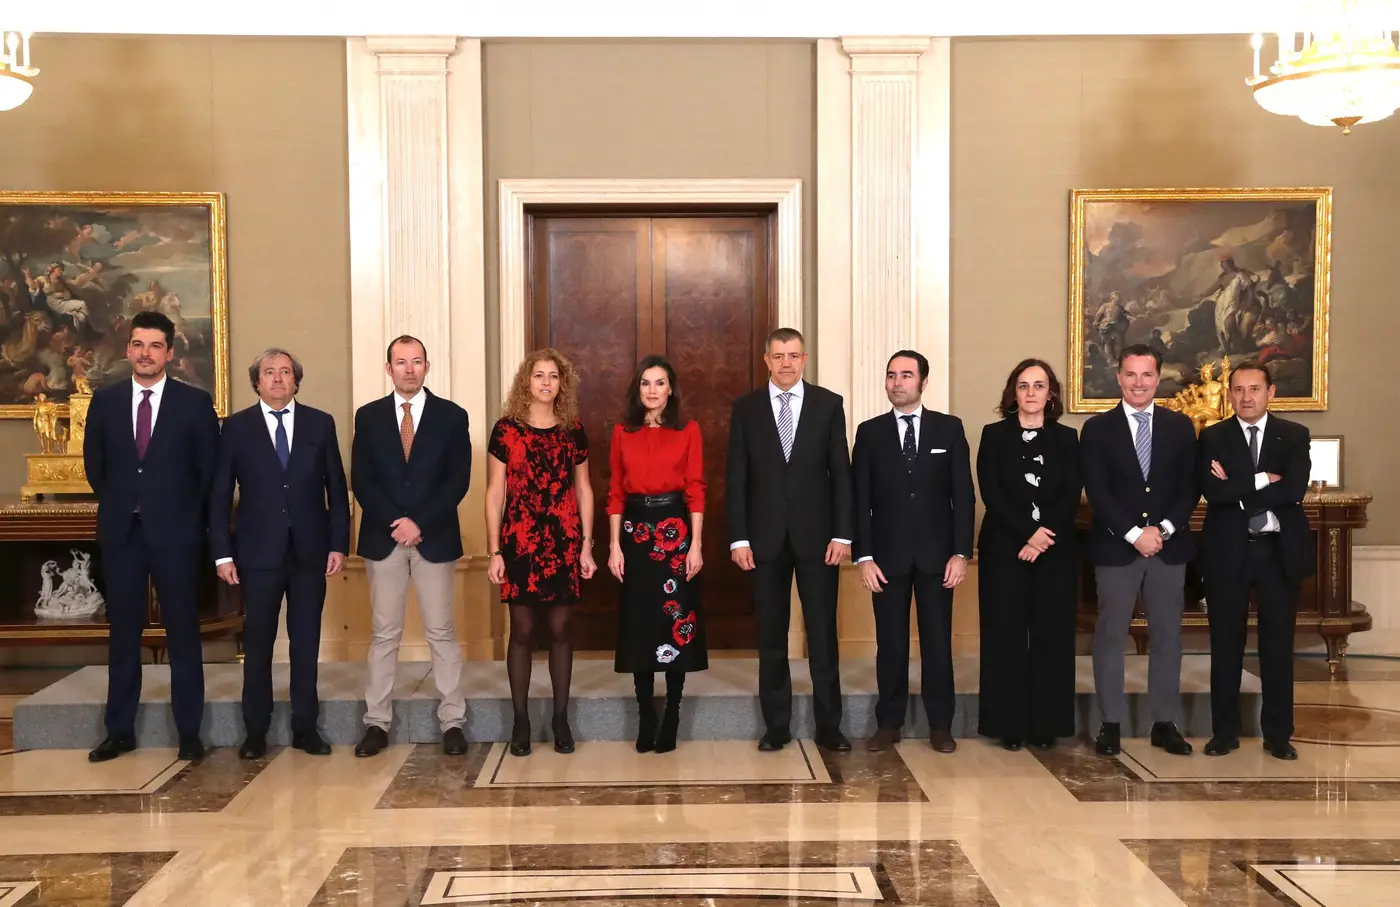 Queen Letizia received audience at palace wearing red hugo boss blouse and black and red carolina Herrera skirt